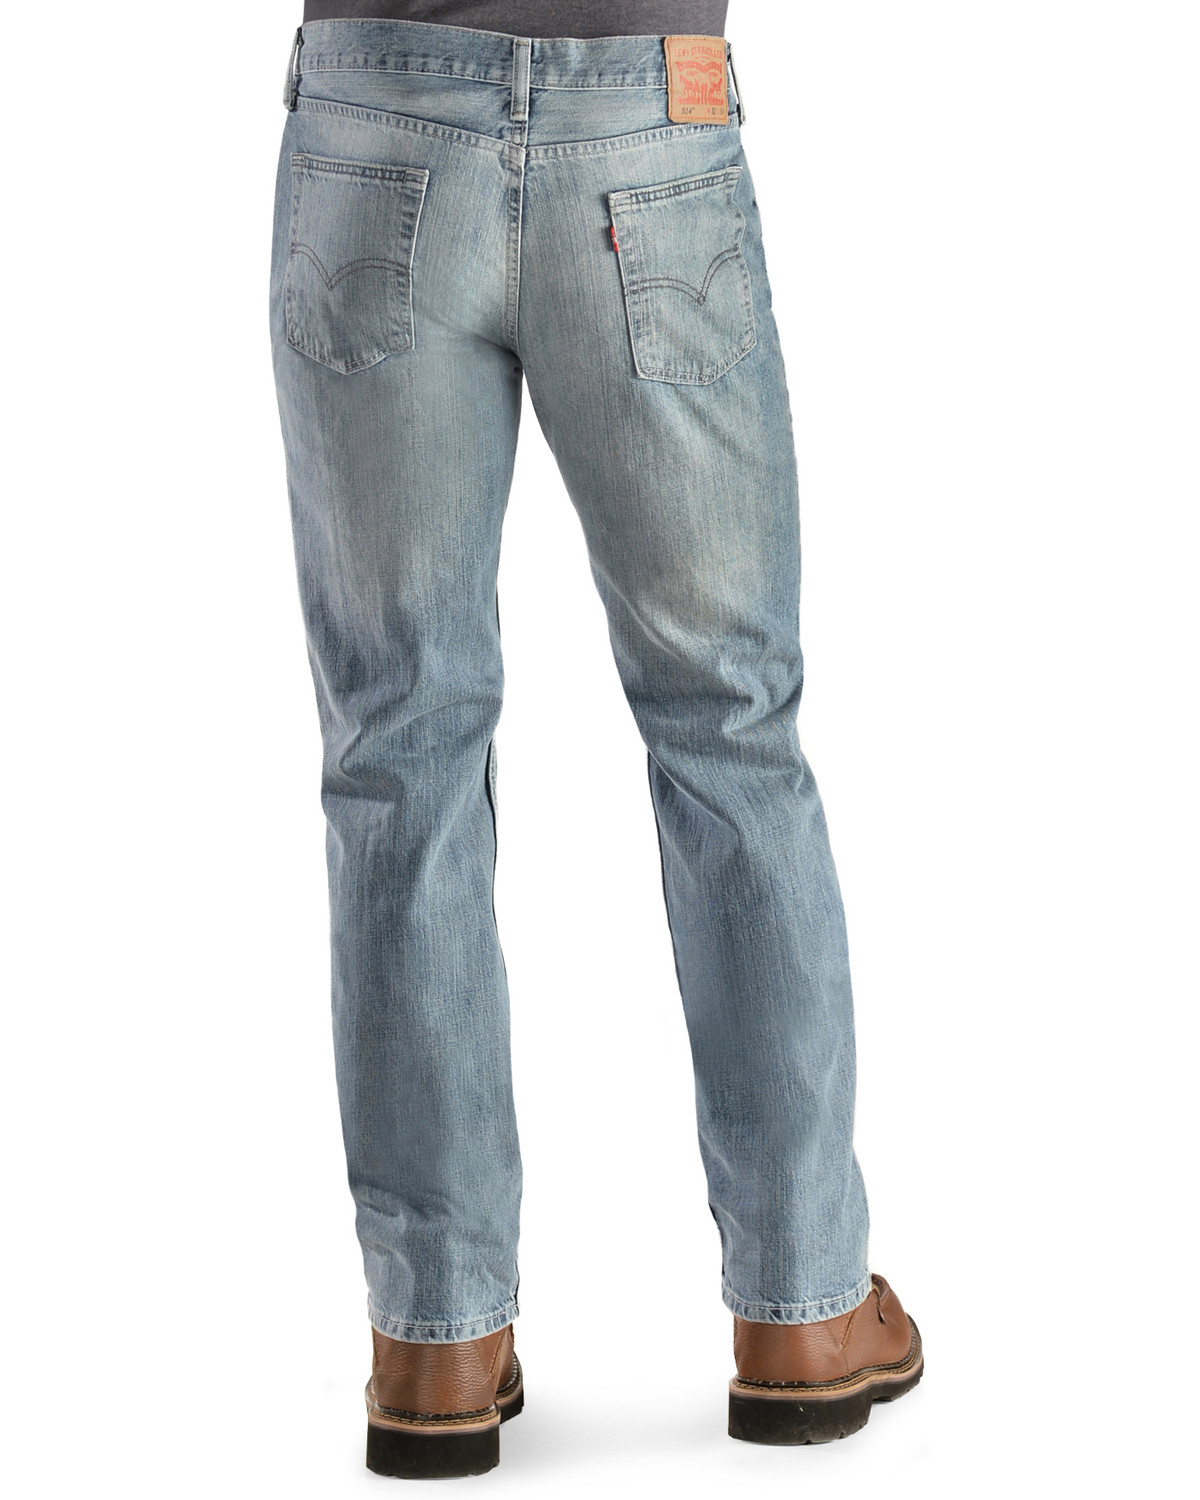 Levi's 514 Jeans - Straight Fit - Country Outfitter